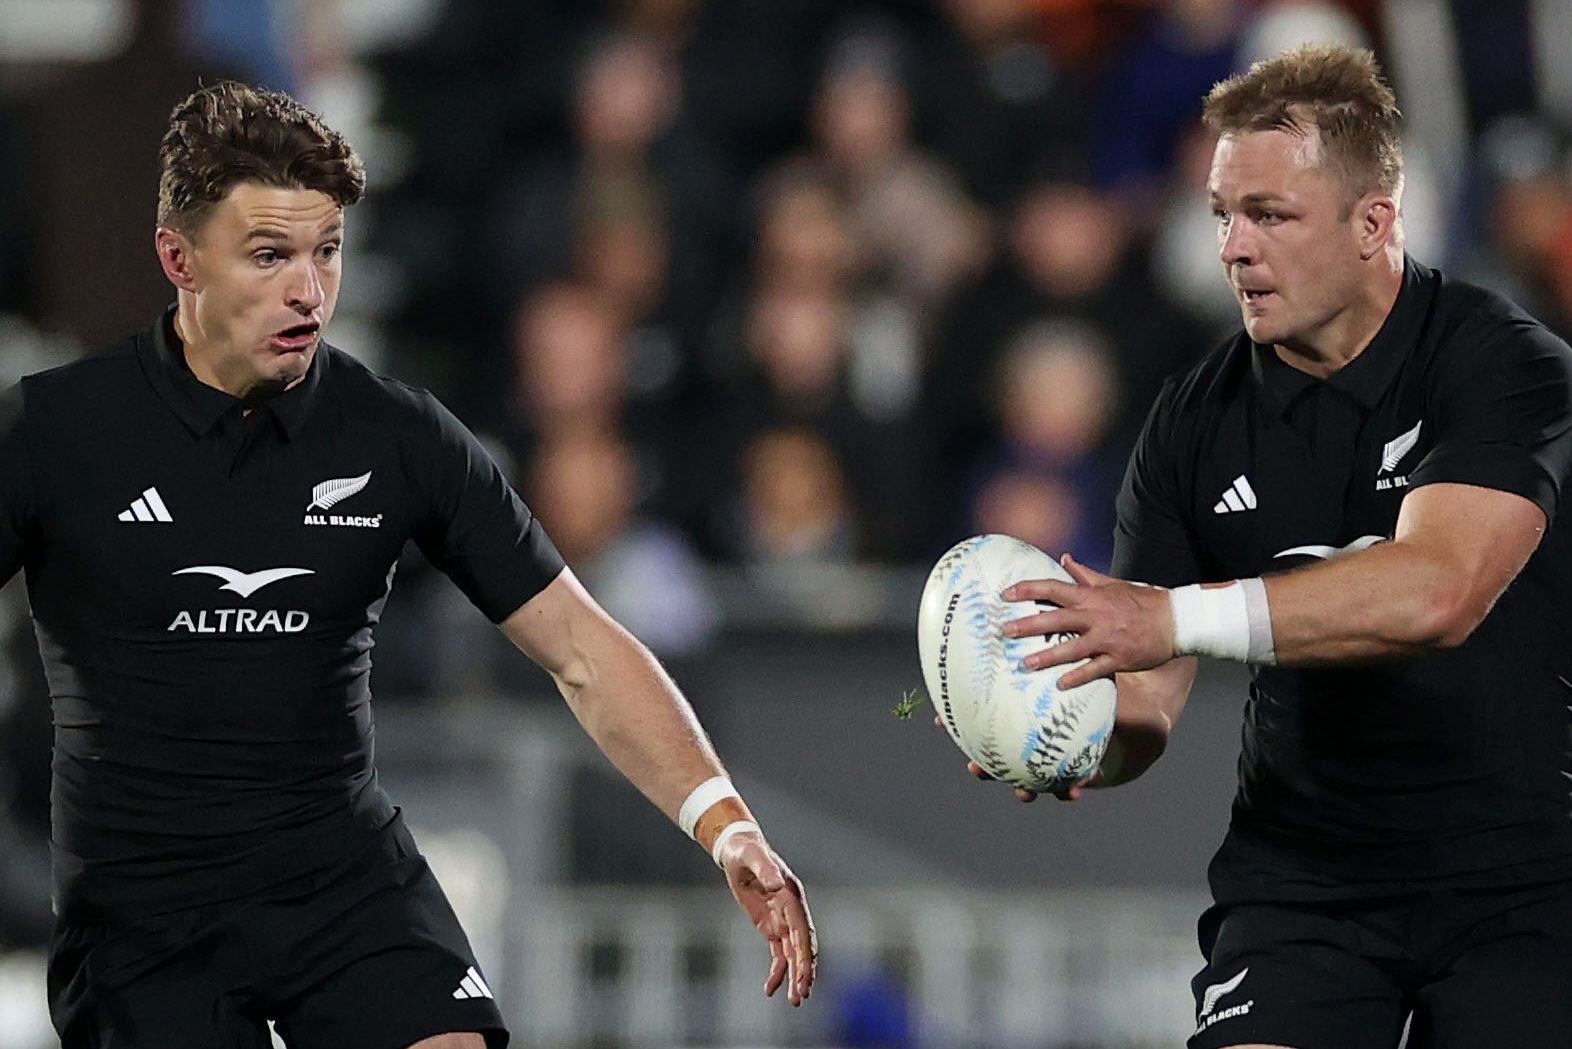 AUCKLAND, NEW ZEALAND - JULY 15: Sam Cane, captain of the All Blacks  (R) looks to pass to Beauden Barrett of the All Blacks    (L) during The Rugby Championship match between the New Zealand All Blacks and South Africa Springboks at Mt Smart Stadium on July 15, 2023 in Auckland, New Zealand. (Photo by Fiona Goodall/Getty Images)